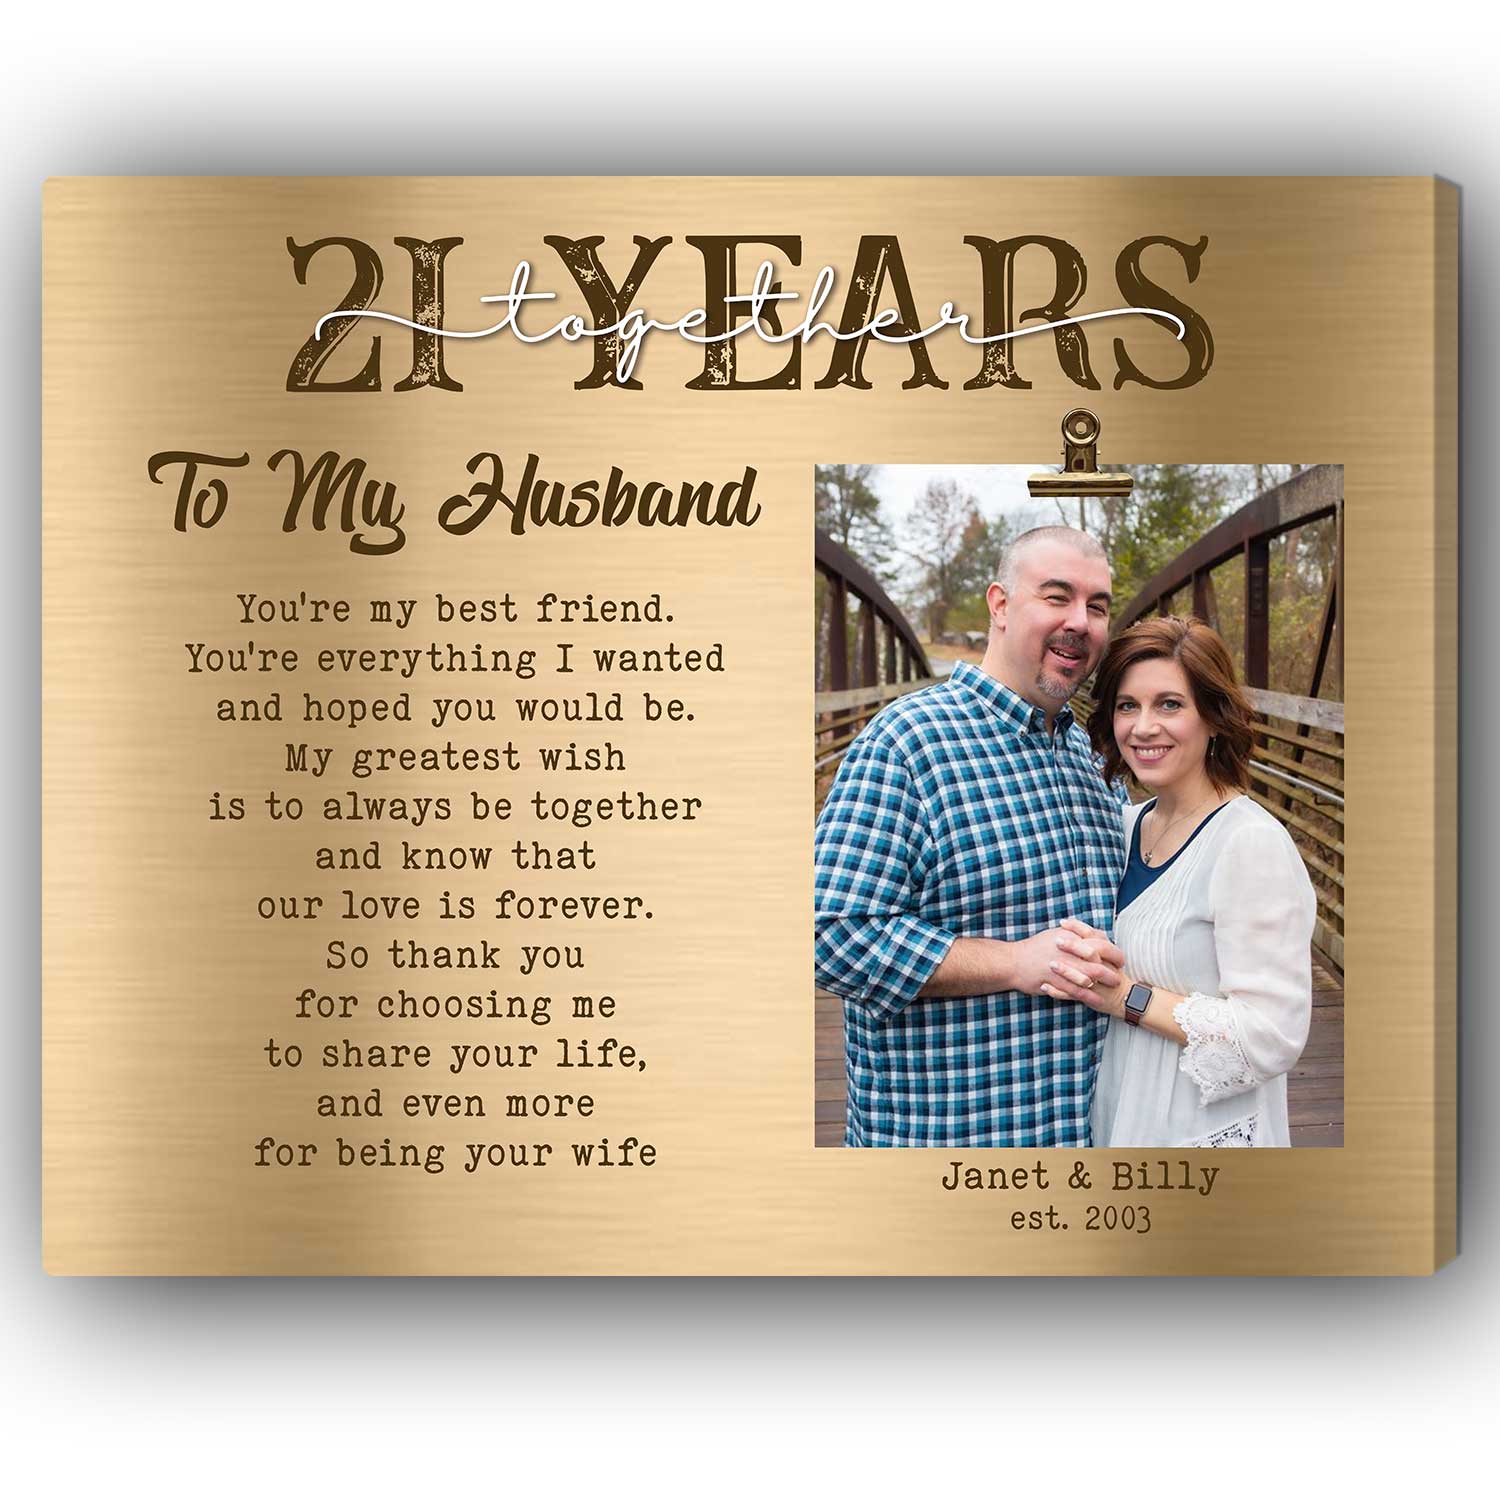 21 Years Together - Personalized 21 Year Anniversary gift For Husband - Custom Canvas Print - MyMindfulGifts